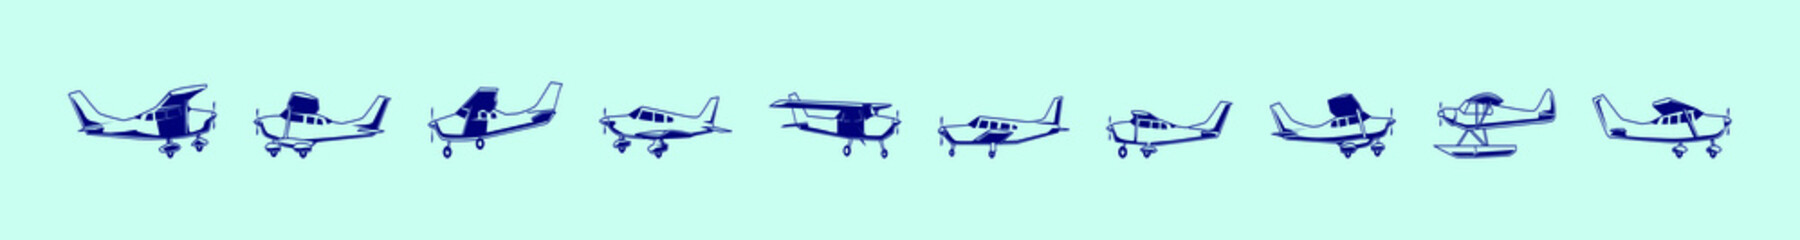 set of cessna plane cartoon icon design template with various models. vector illustration isolated on blue background